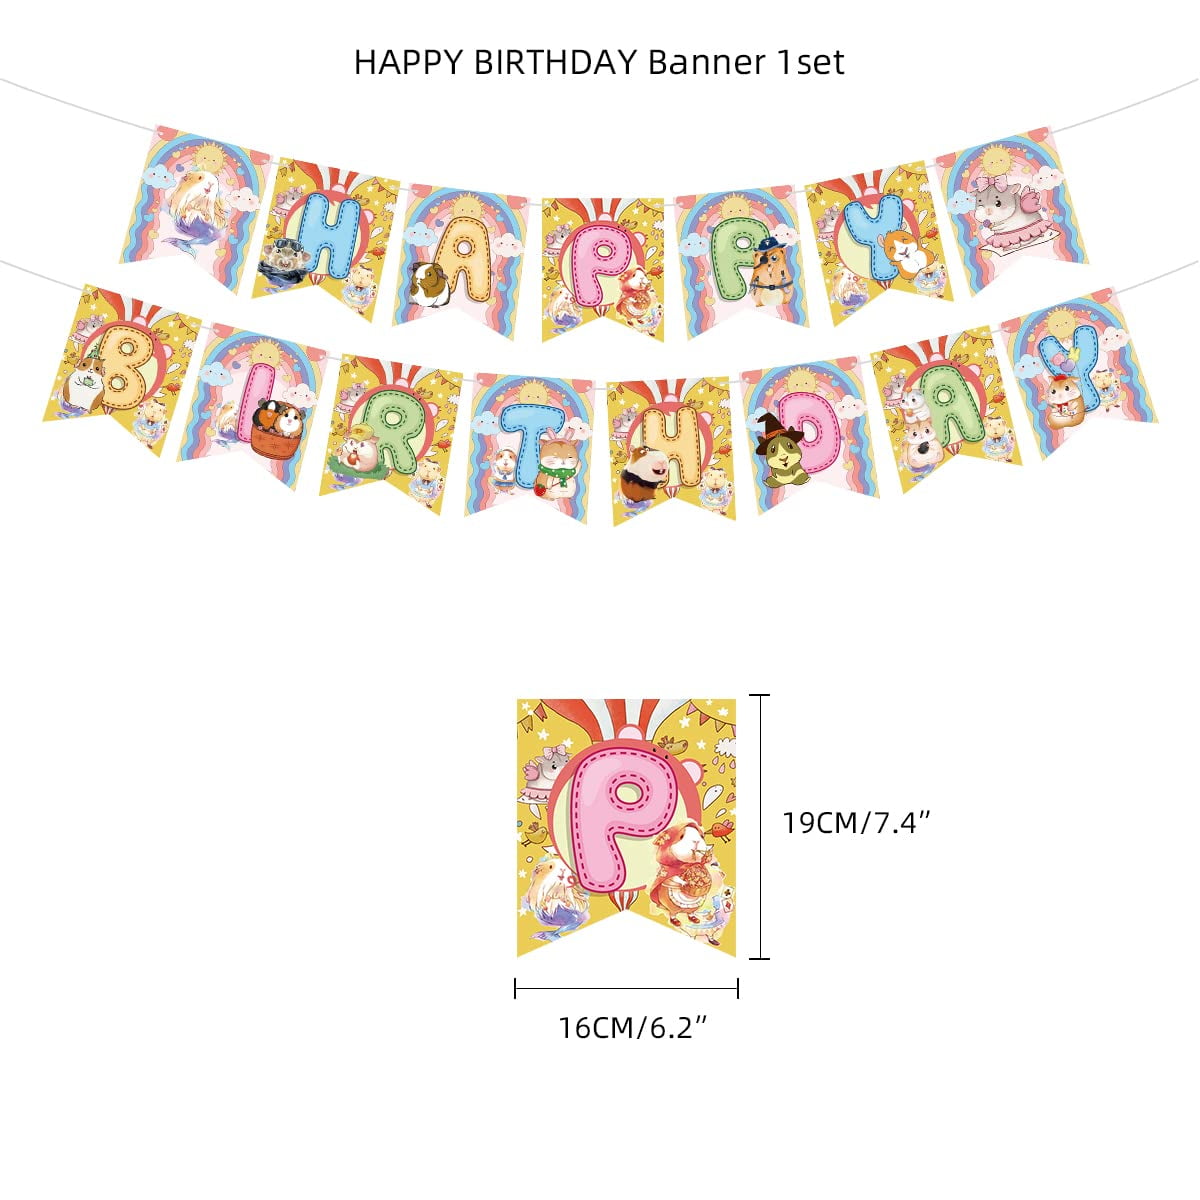  Guinea Pig Birthday Party Decorations Hamster Party Supplies  for Kids Include Happy Birthday Banner Kawaii Pui Pui Cartoon Decorations  ，Children Birthday Party Balloons Banners Cupcake Decorations : Toys & Games